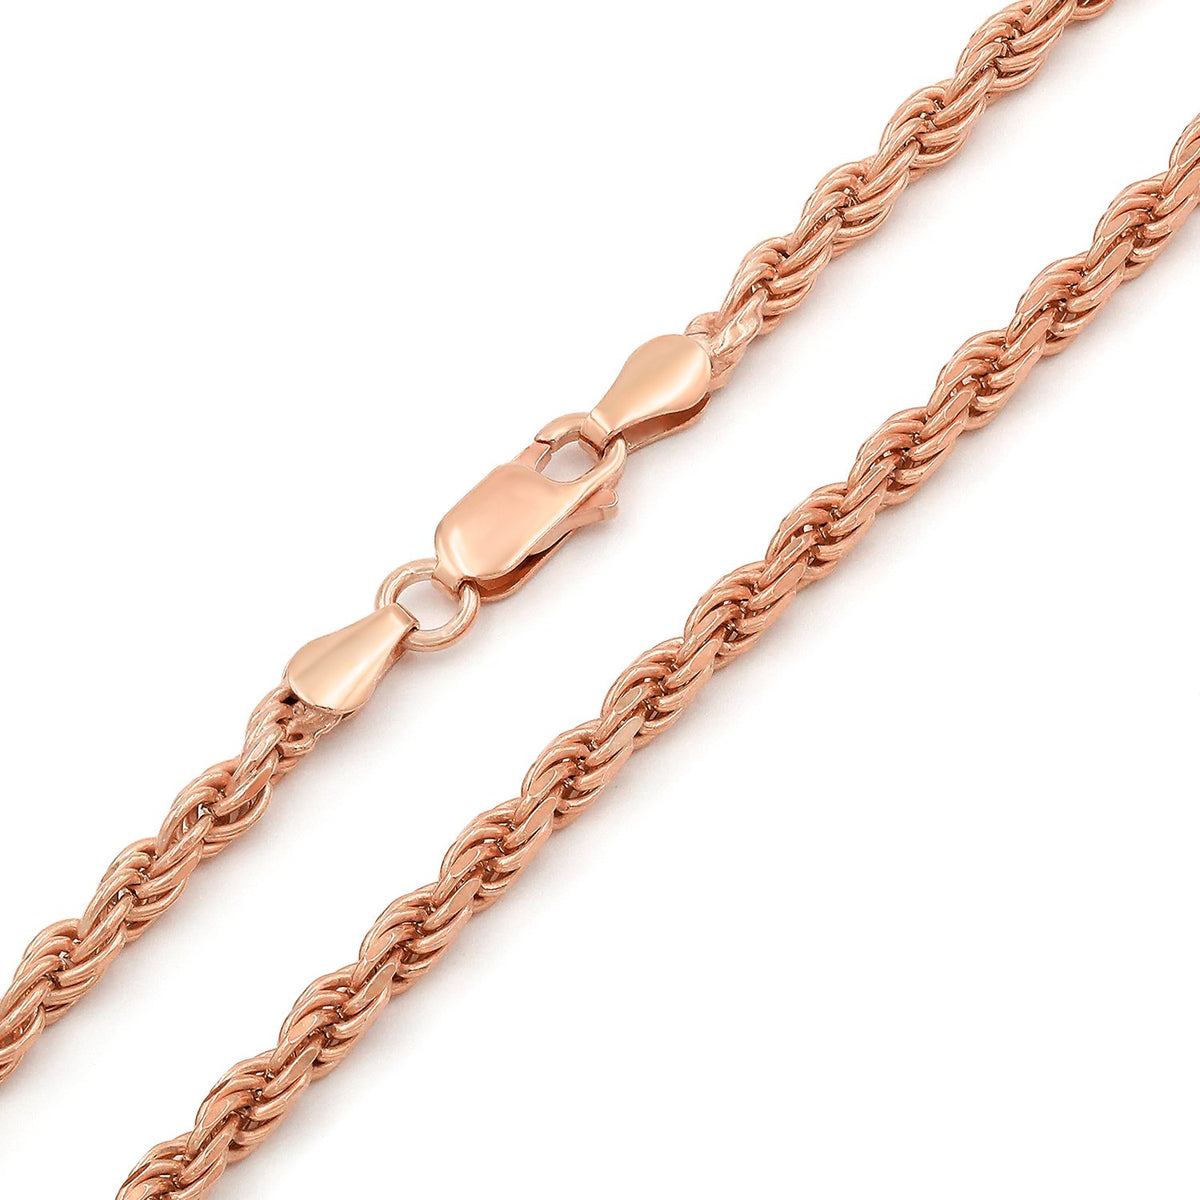 14K Rose Gold 3.5mm Solid Rope Diamond Cut Chain